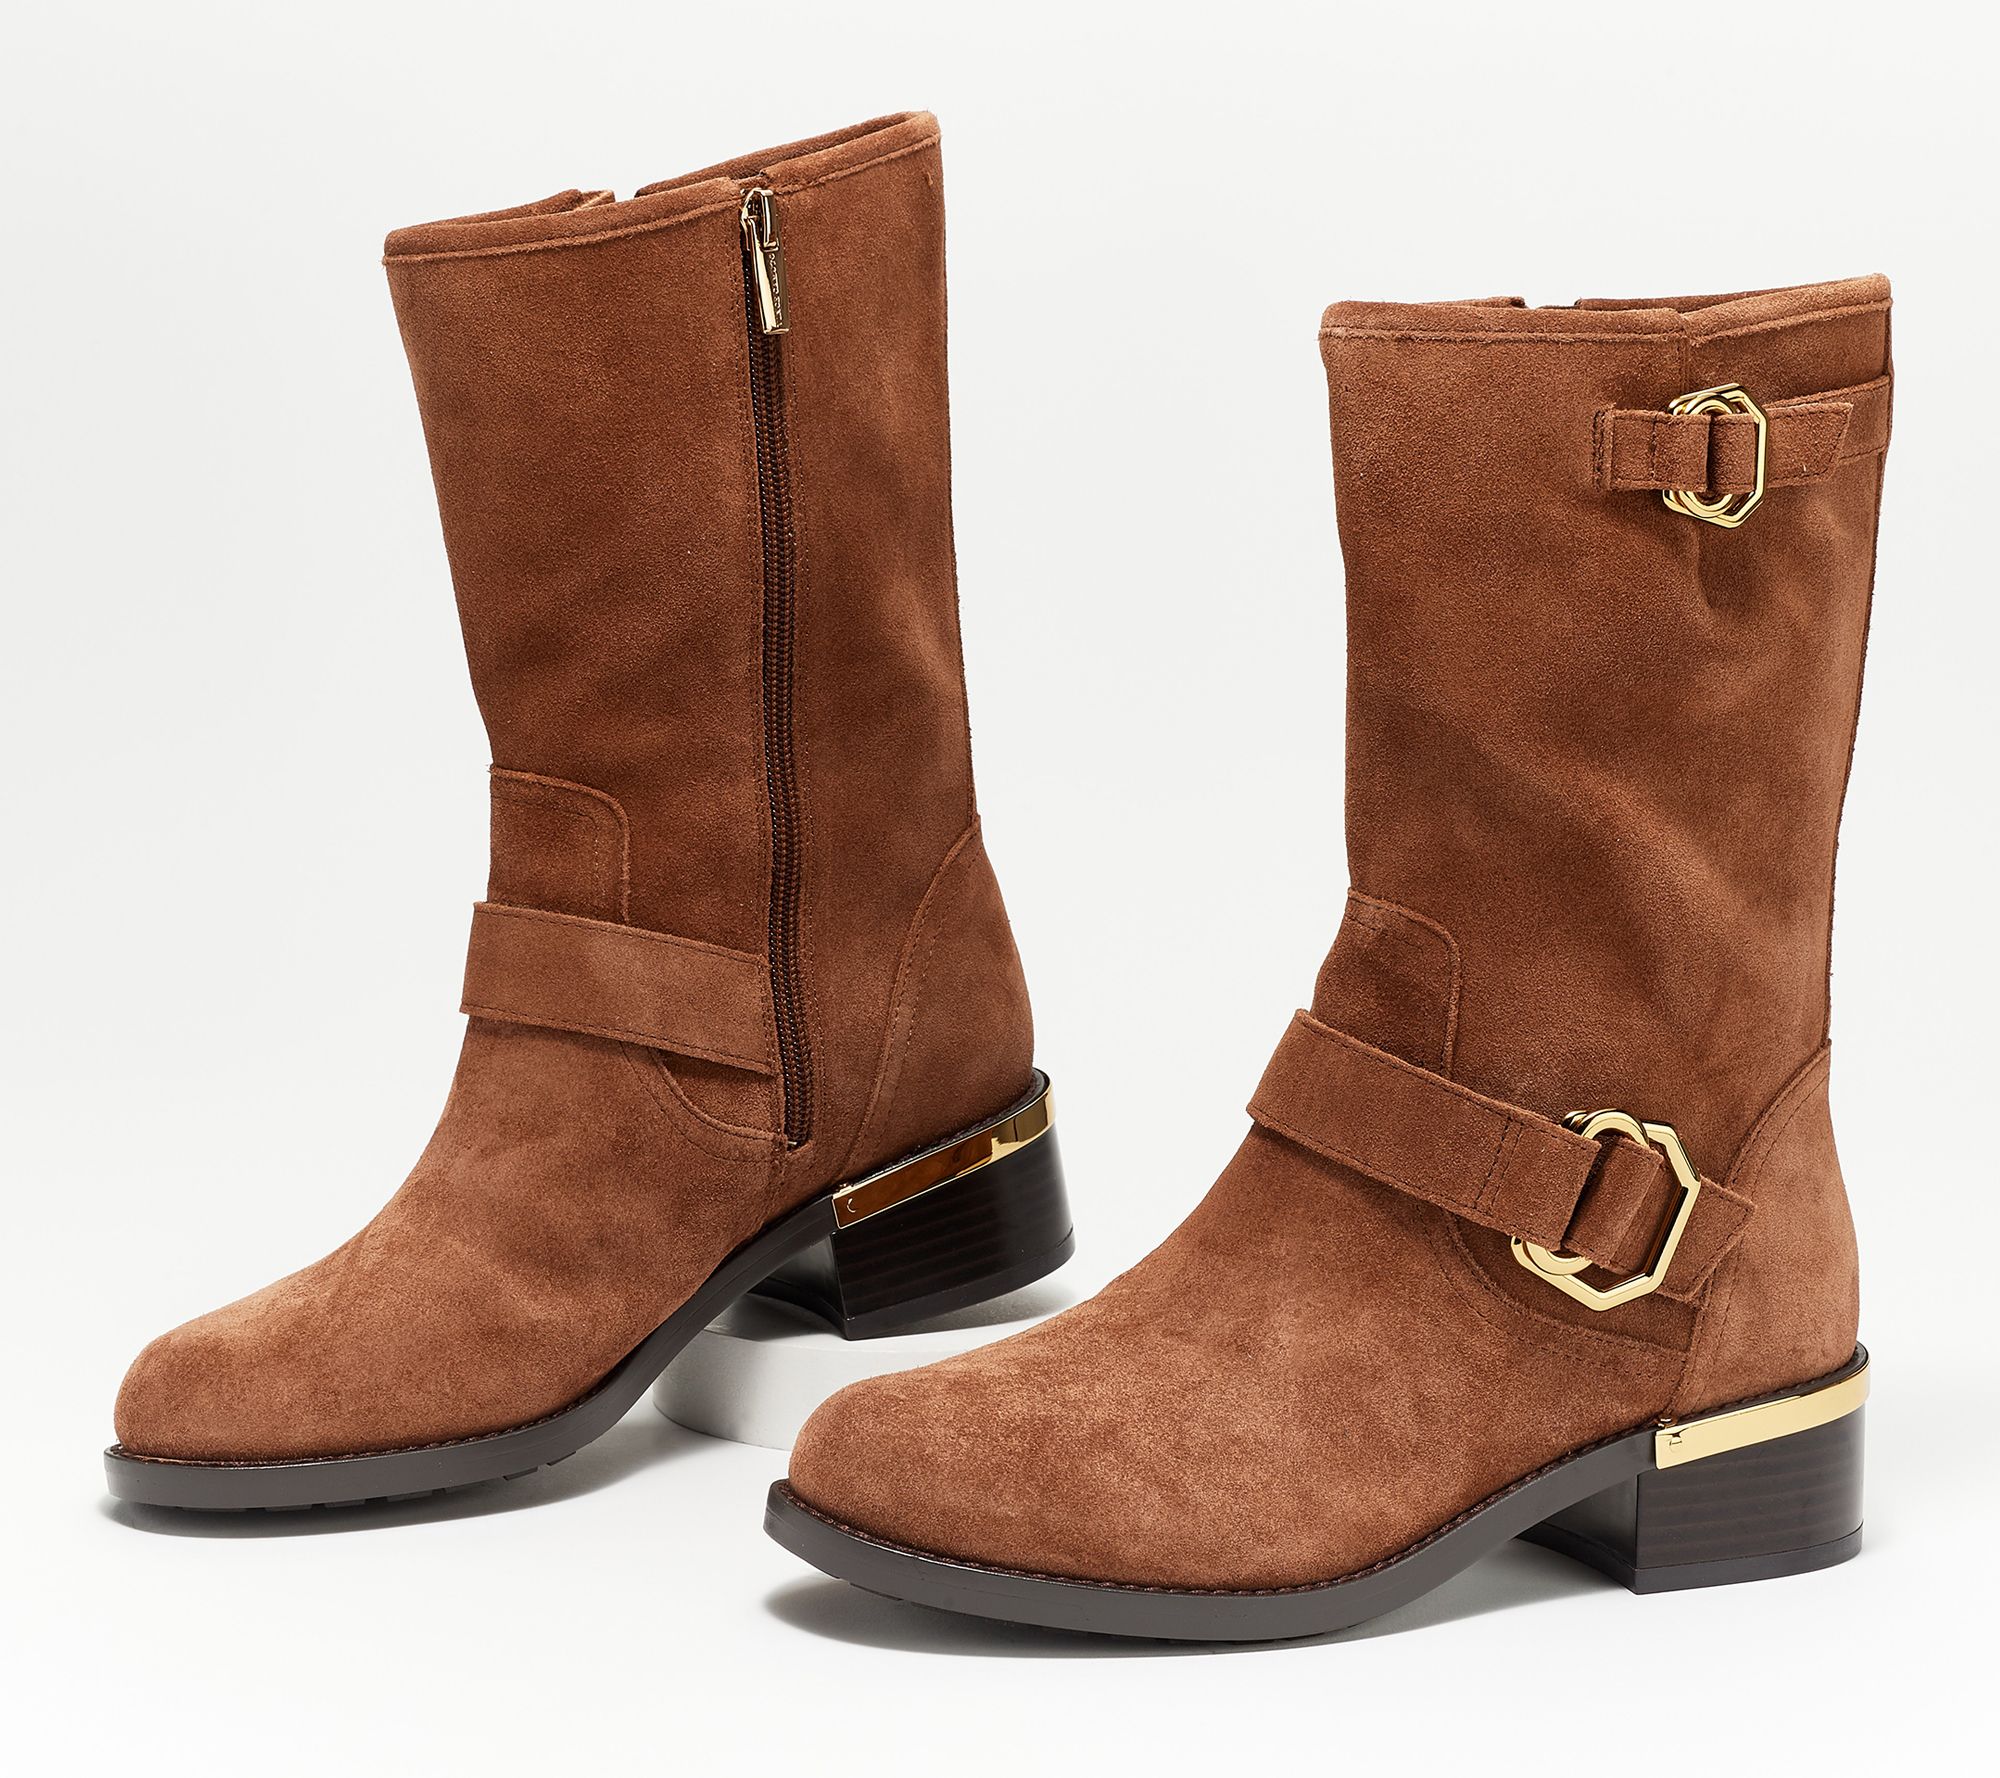 Vince Camuto Leather or Suede Mid Calf 